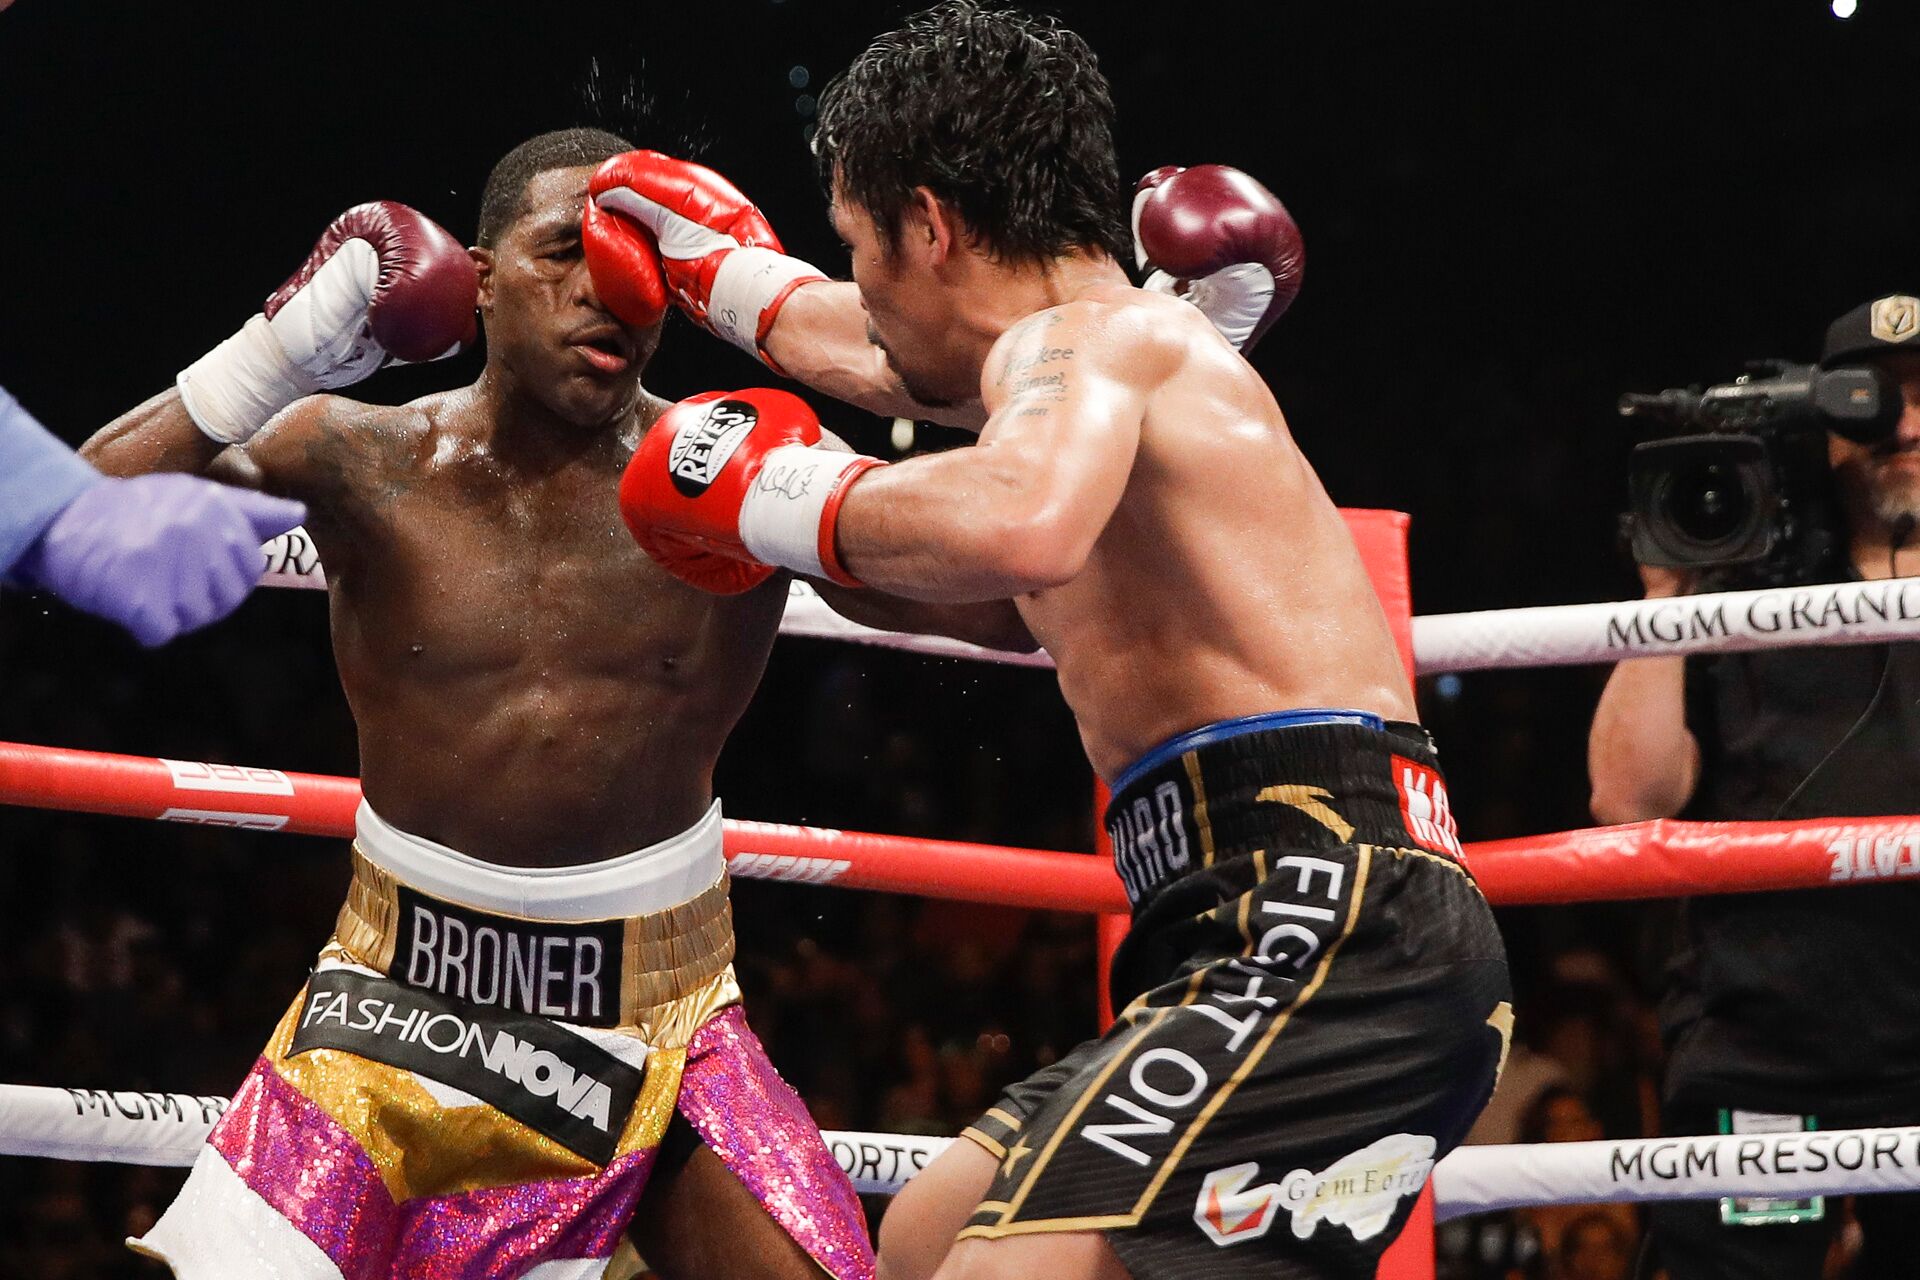 Manny Pacquiao (right) vs. Adrien Broner. Photo by Esther Lin/Showtime